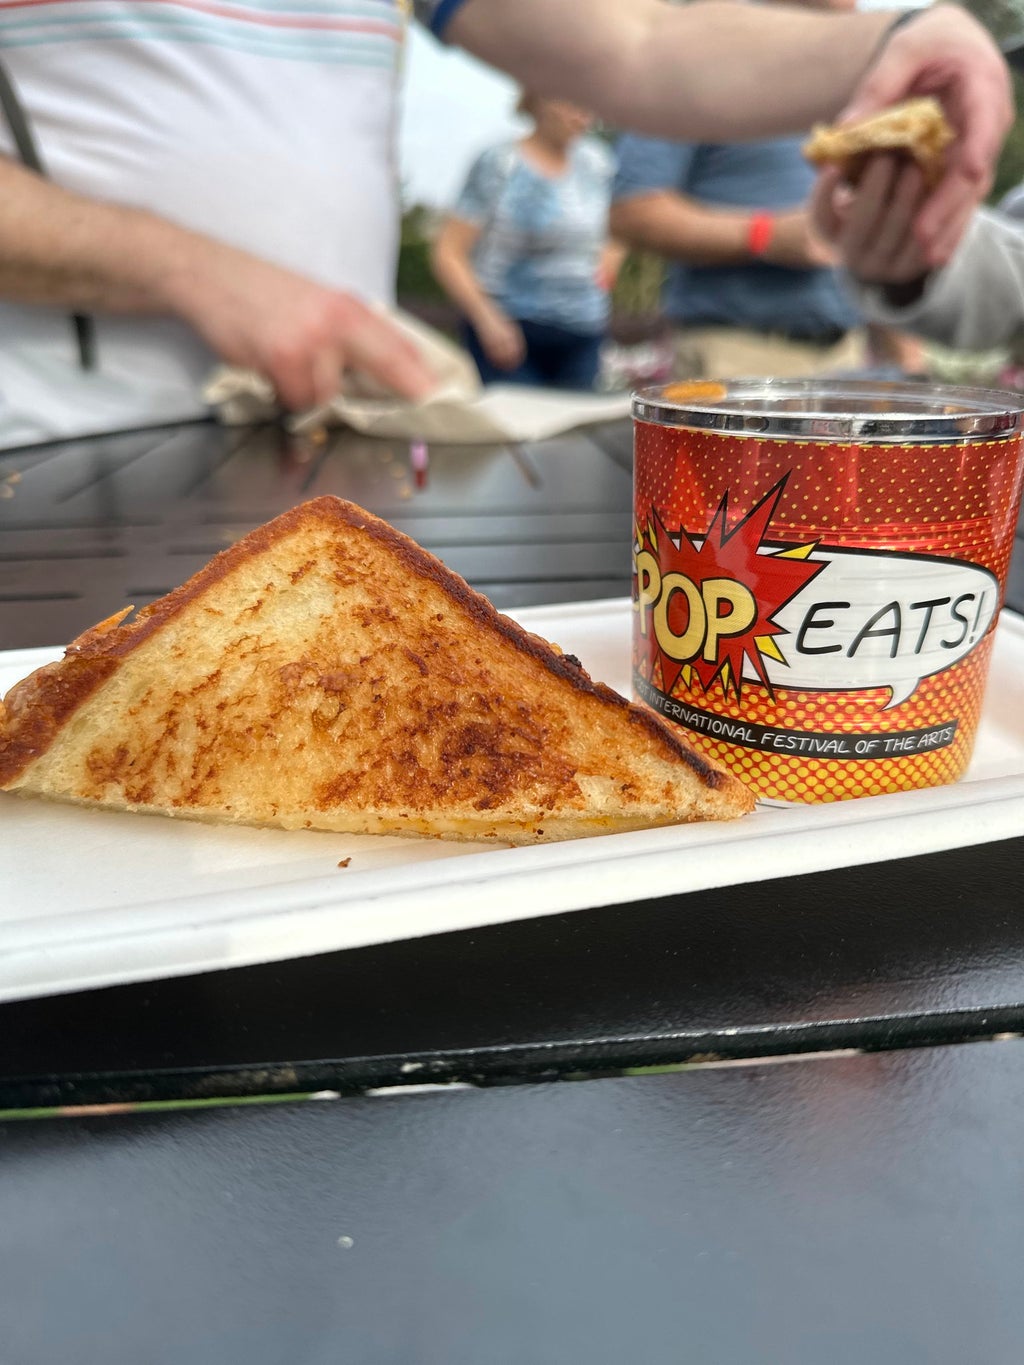 Photo of Pop Eats grilled cheese and tomato soup at WDW